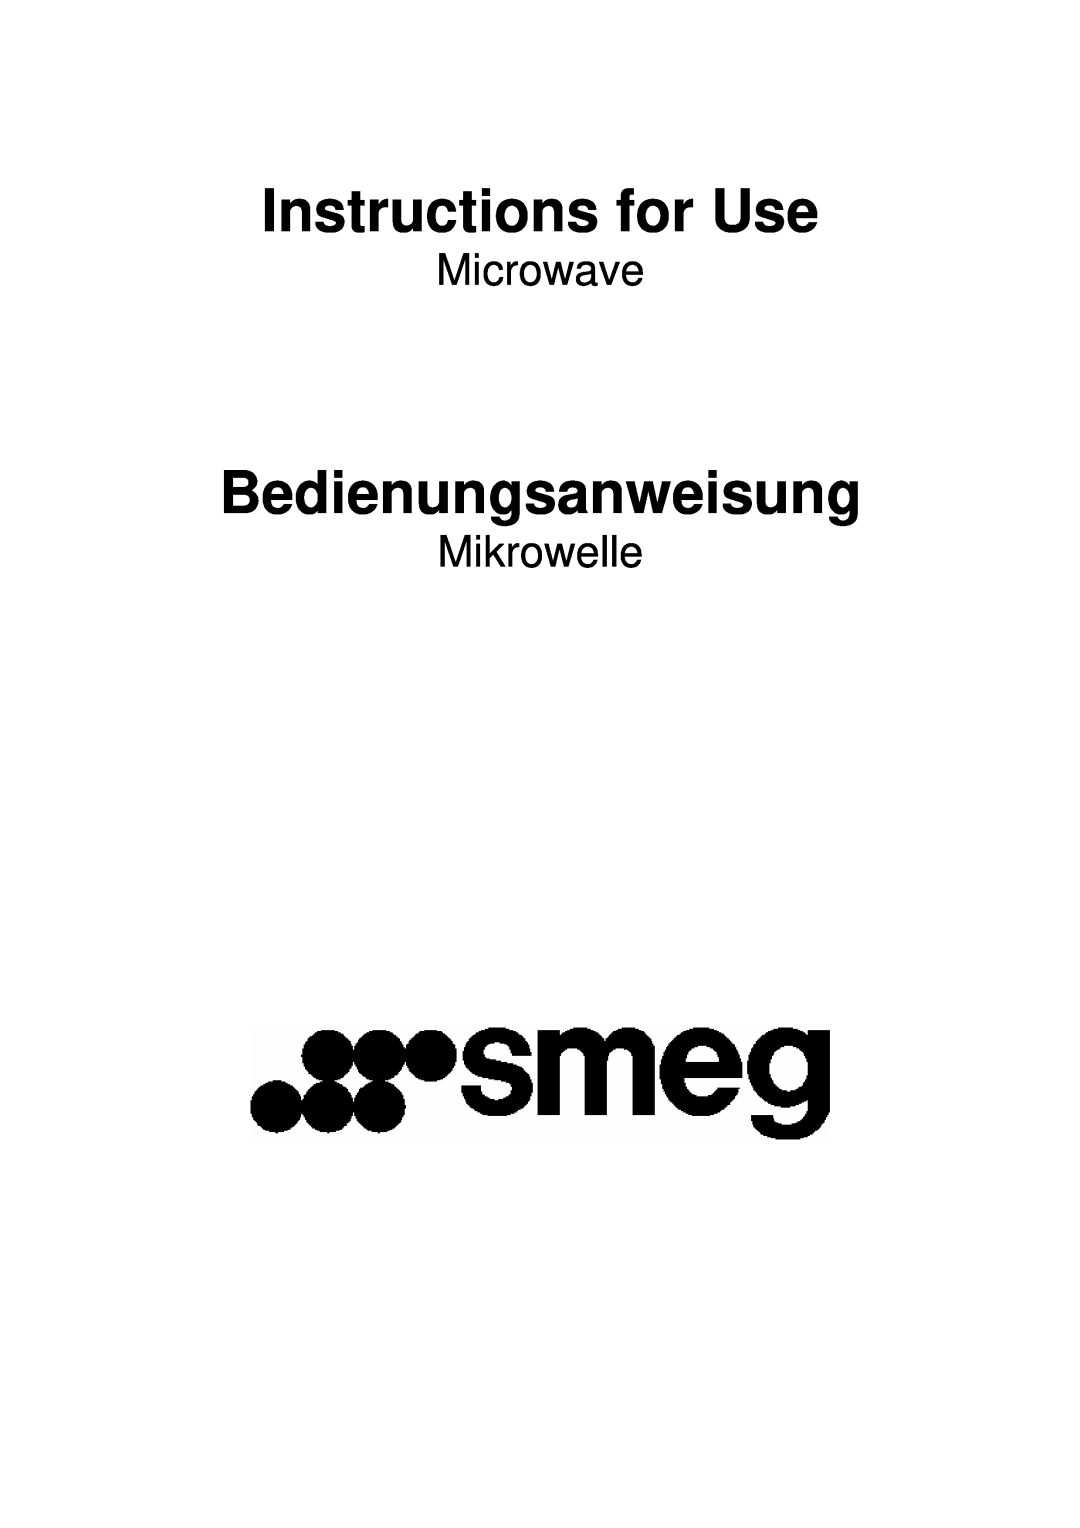 Smeg S45MX manual Instructions for Use, Bedienungsanweisung, Microwave, Mikrowelle 